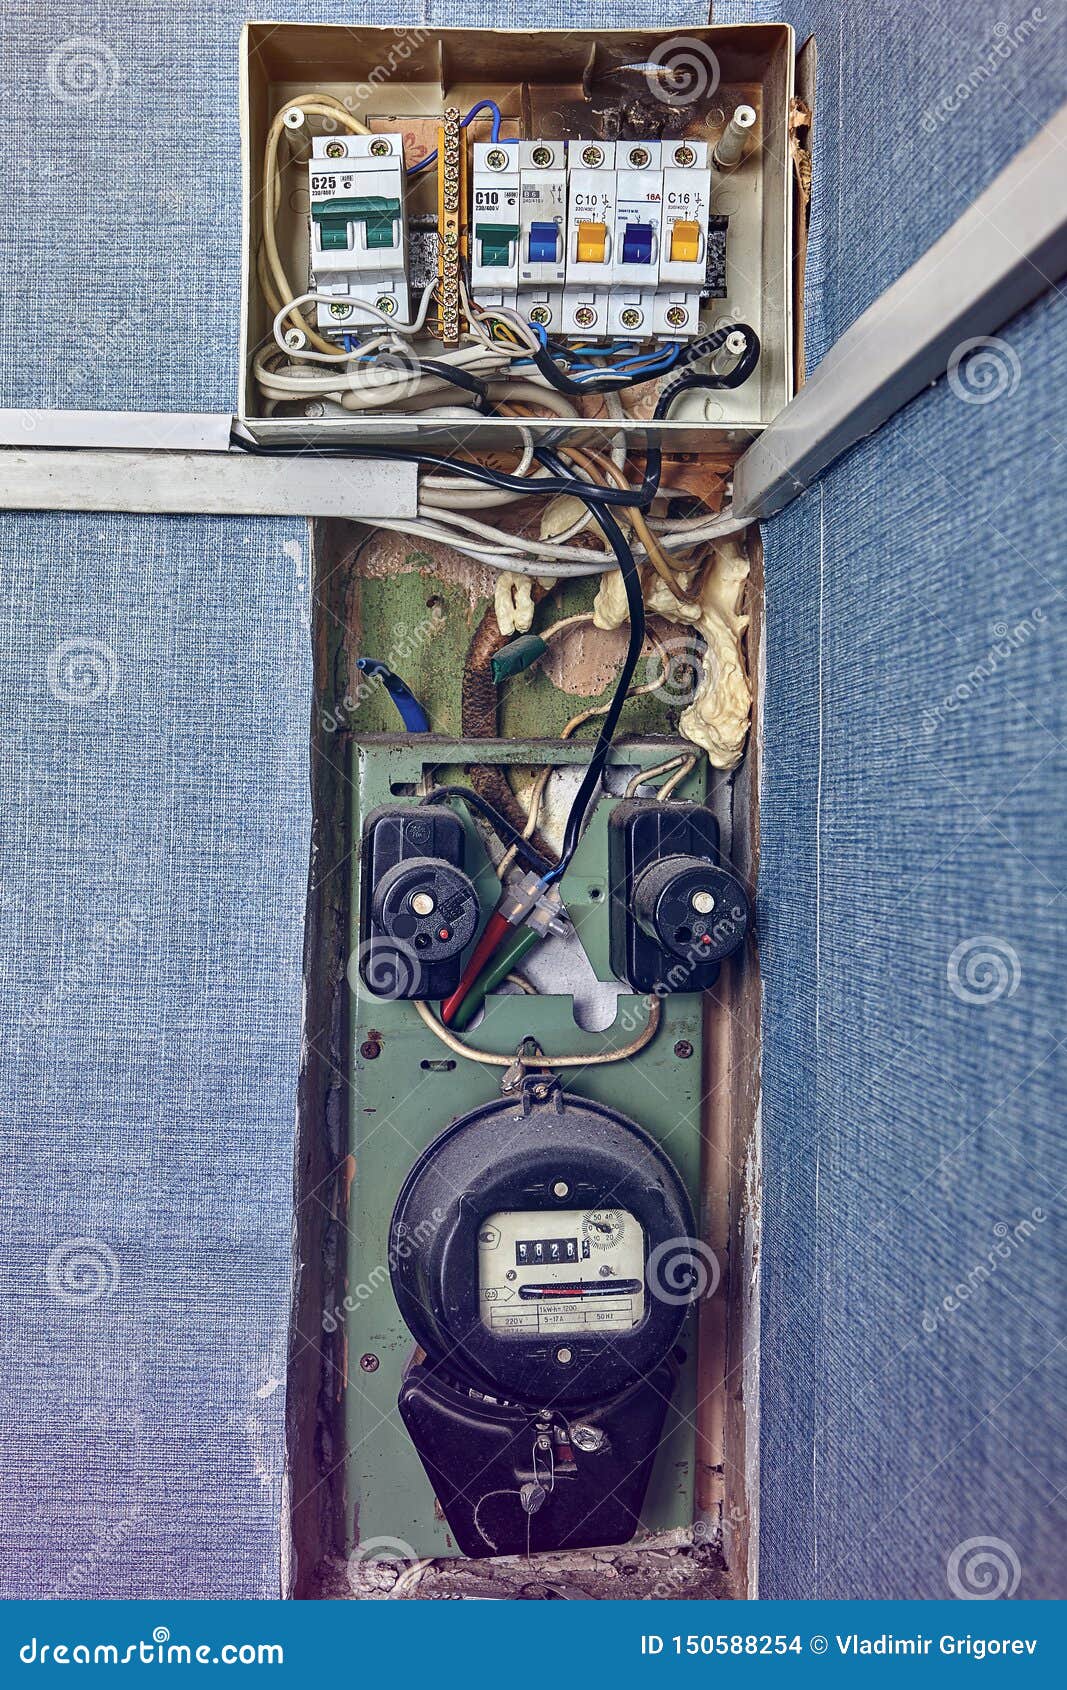 Burnt Fuse Box Home Wiring Diagram With Meter Stock Photo Image Of Panel Equipment 150588254